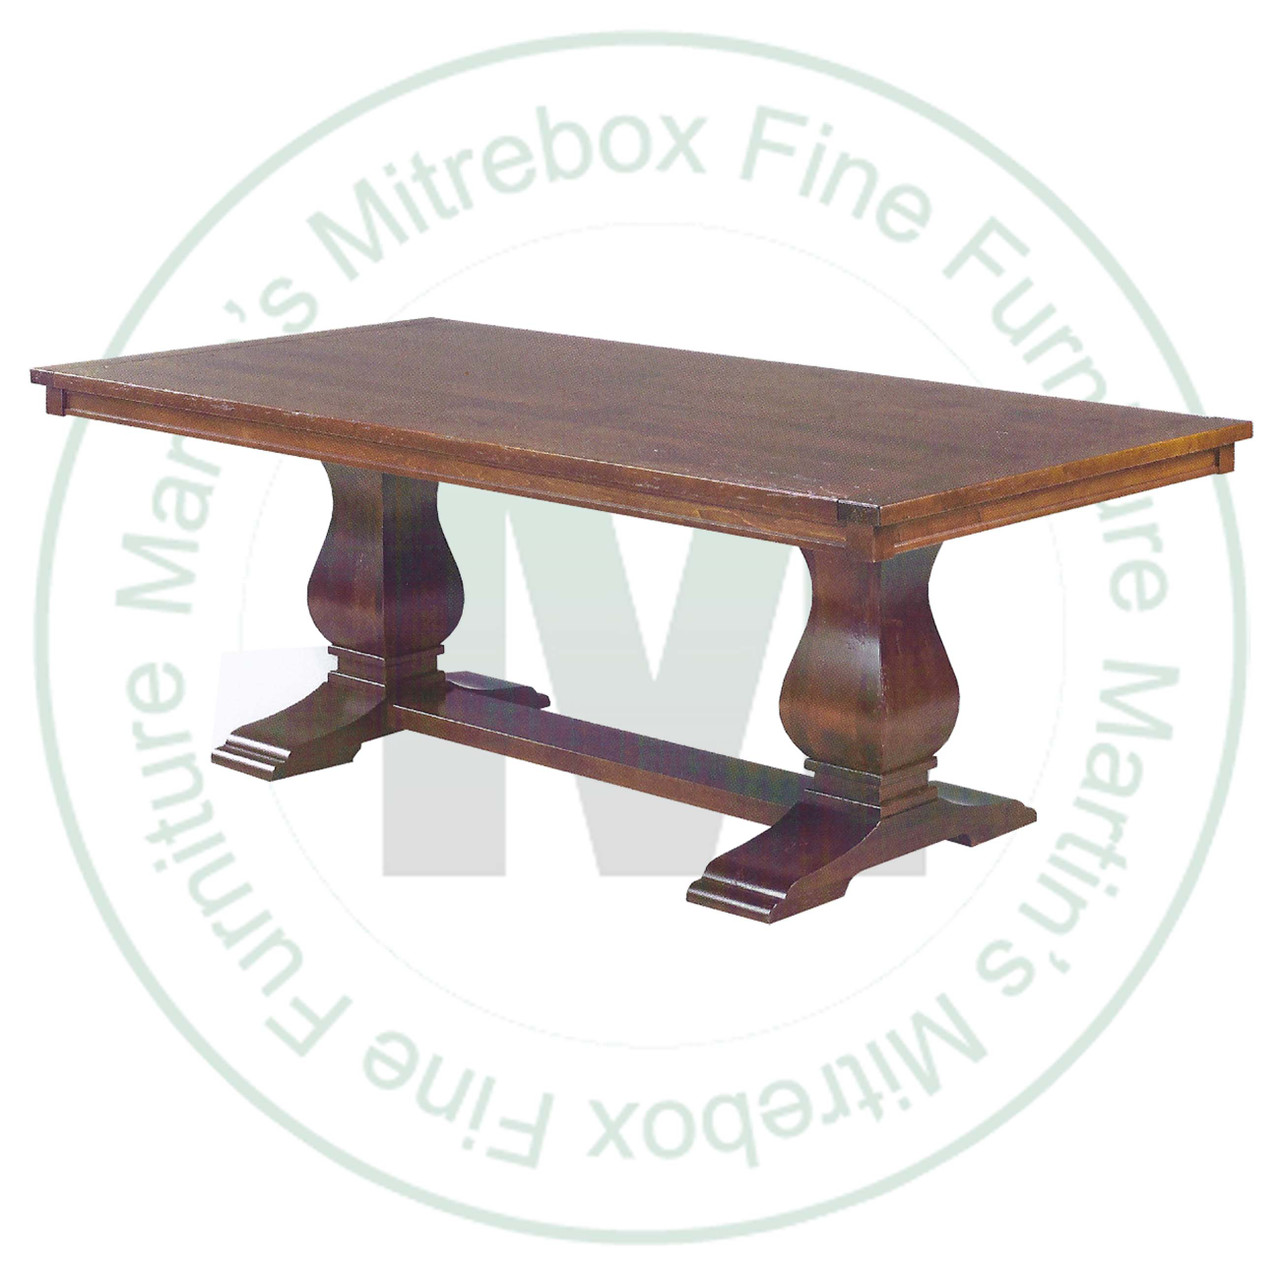 Maple Socrates Double Pedestal Table 48''D x 96''W x 30''H With 3 - 12'' Leaves. Table Has 1.25'' Thick Top